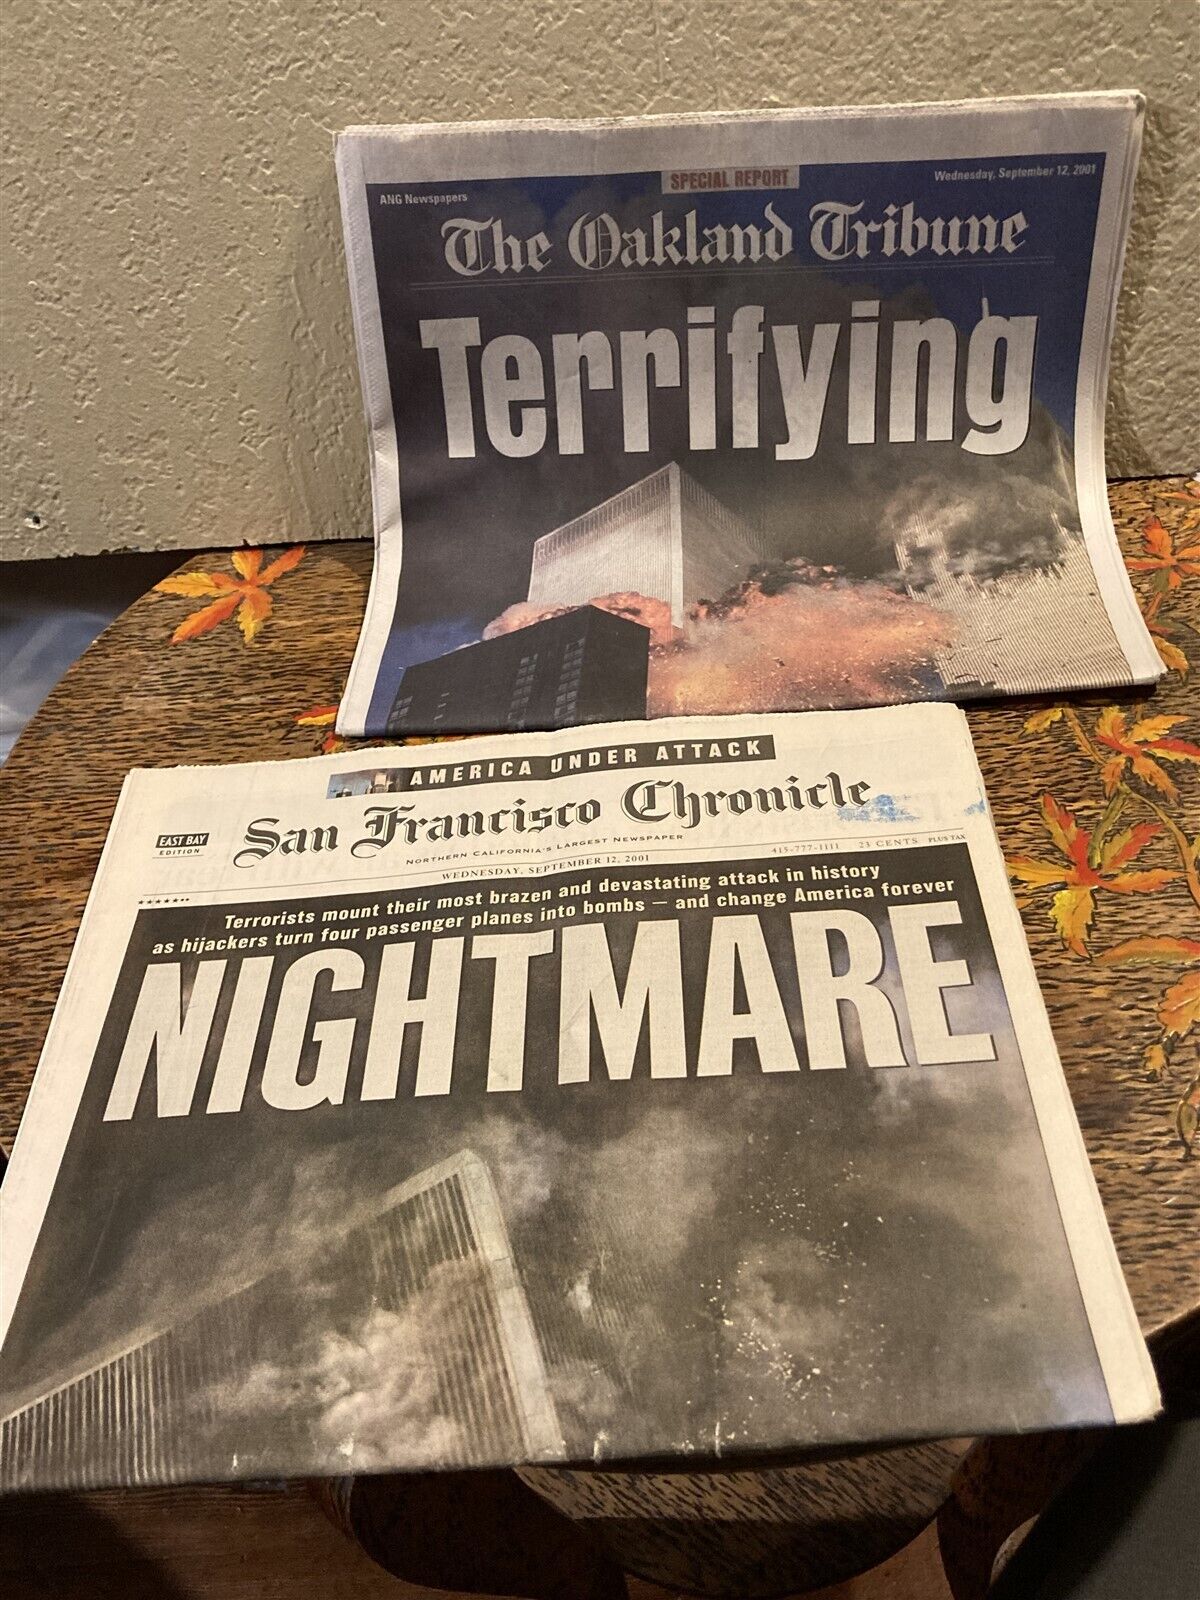 Terrifying, NIGHTMARE - Two Oakland CA newspapers for 9/11 terrorist attack